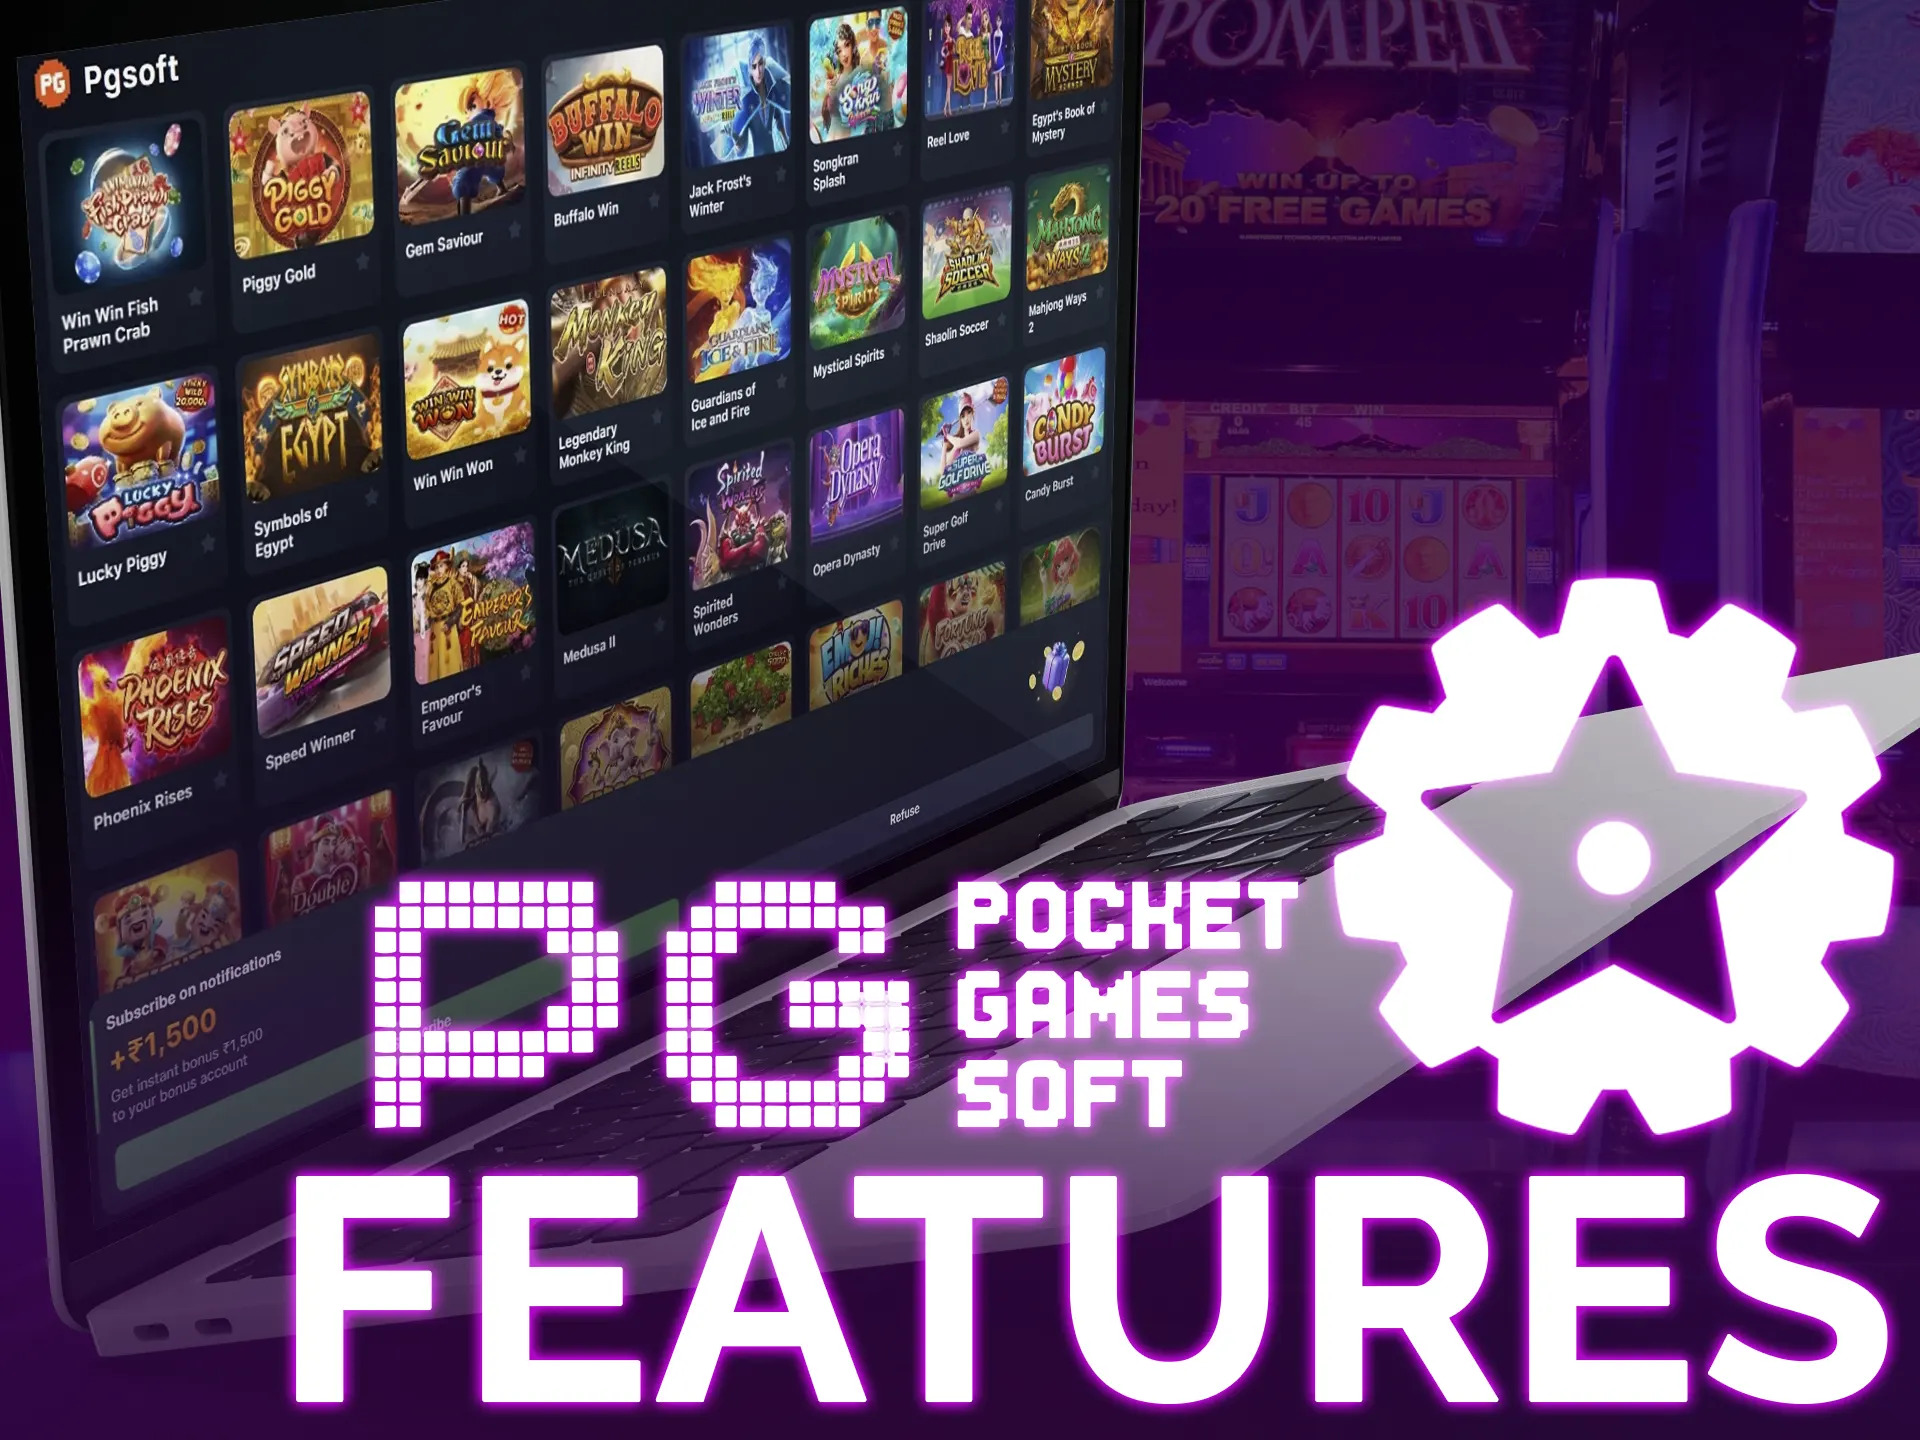 PG Soft slots provide diverse mechanics, from standard reels to cluster payouts.